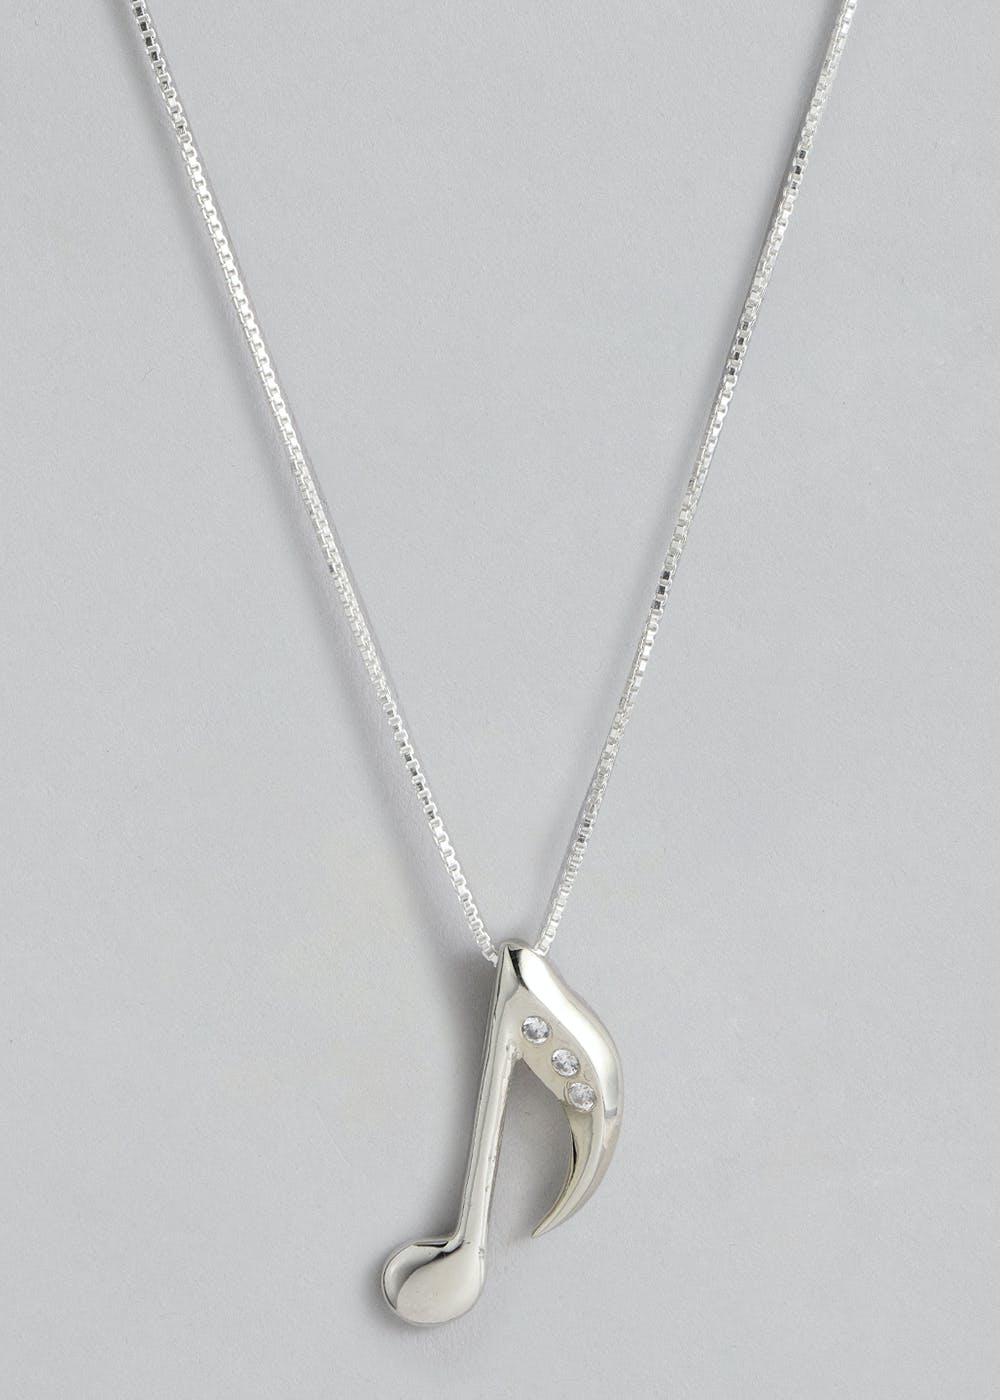 Silver Musical Note Pendant | Silver Necklace Pendant | Musical Necklace  Women - Necklace - Aliexpress